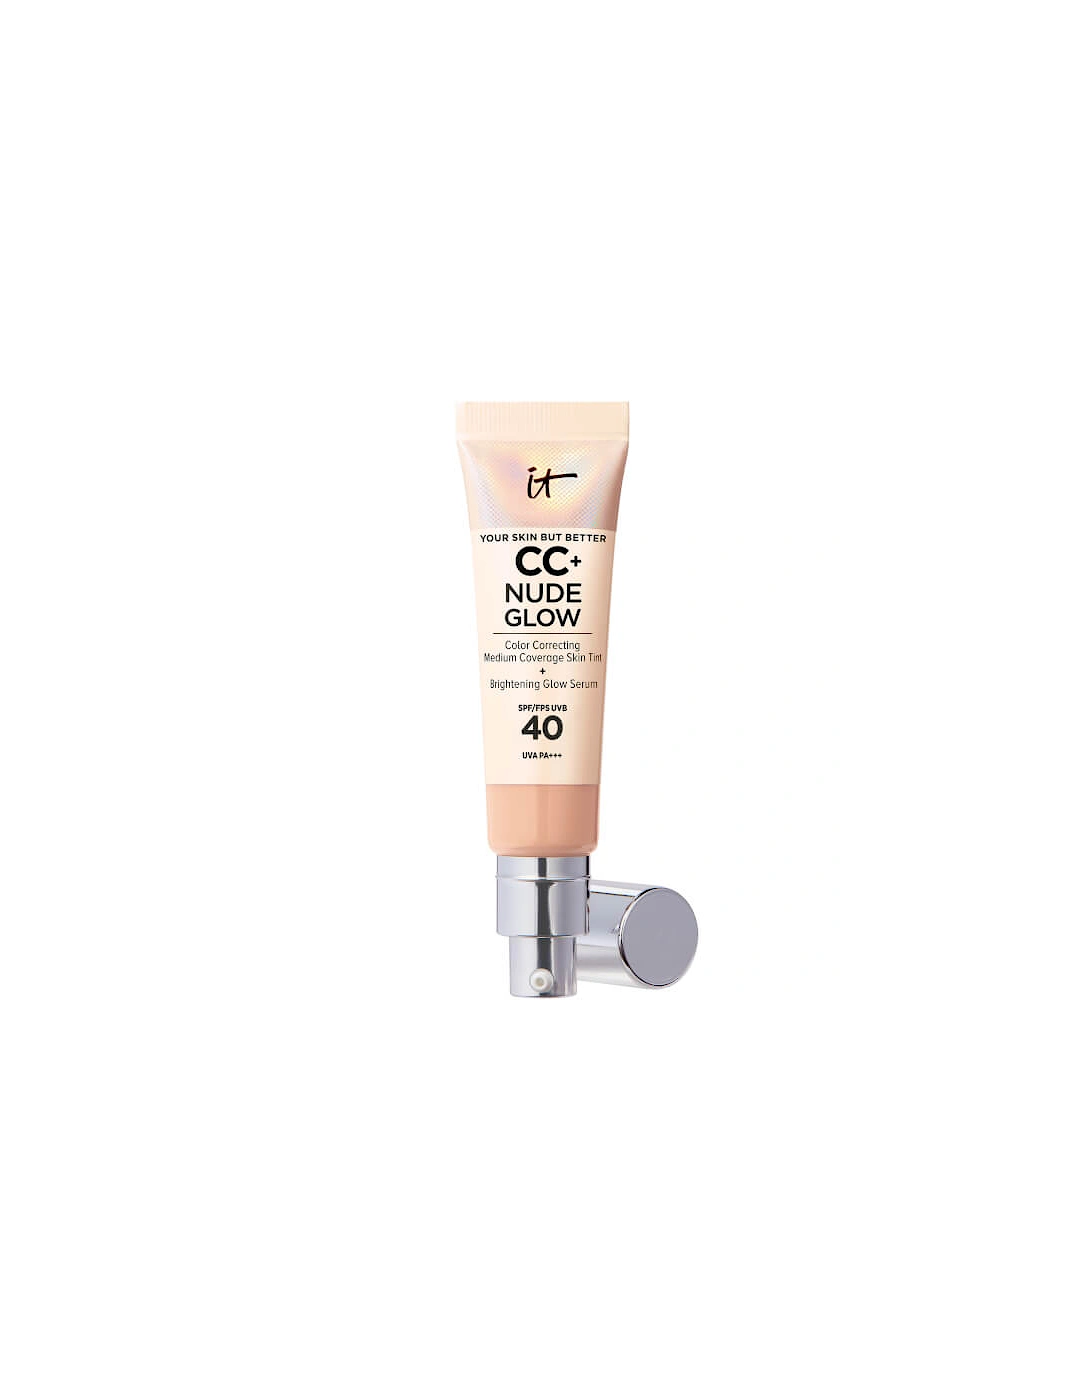 CC+ and Nude Glow Lightweight Foundation and Glow Serum with SPF40 - Neutral Medium, 2 of 1